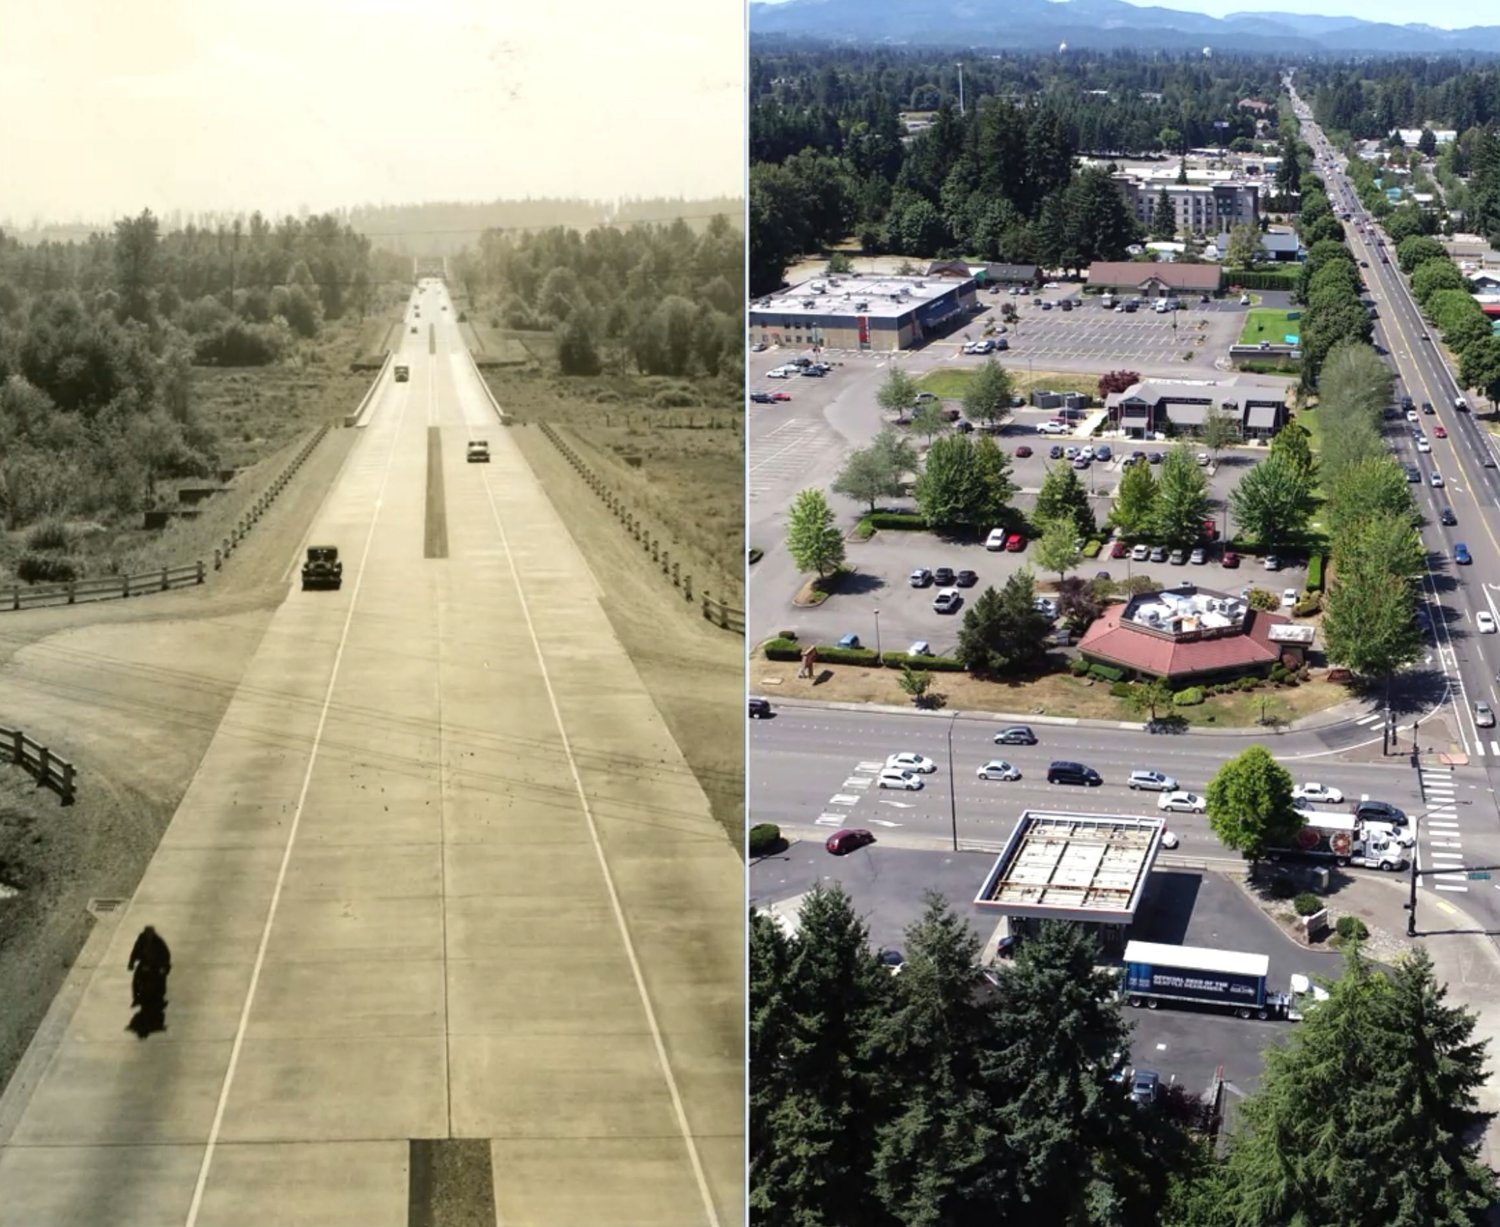 The left photo shows how the Martin Way Corridor looked when originally constructed in the early 1930’s. The Corridor was a part of the original highway system. The right photo shows what Martin Way looks like now as the county plans to turn the area from an automobile-dominated roadway to a more pedestrian-friendly road.